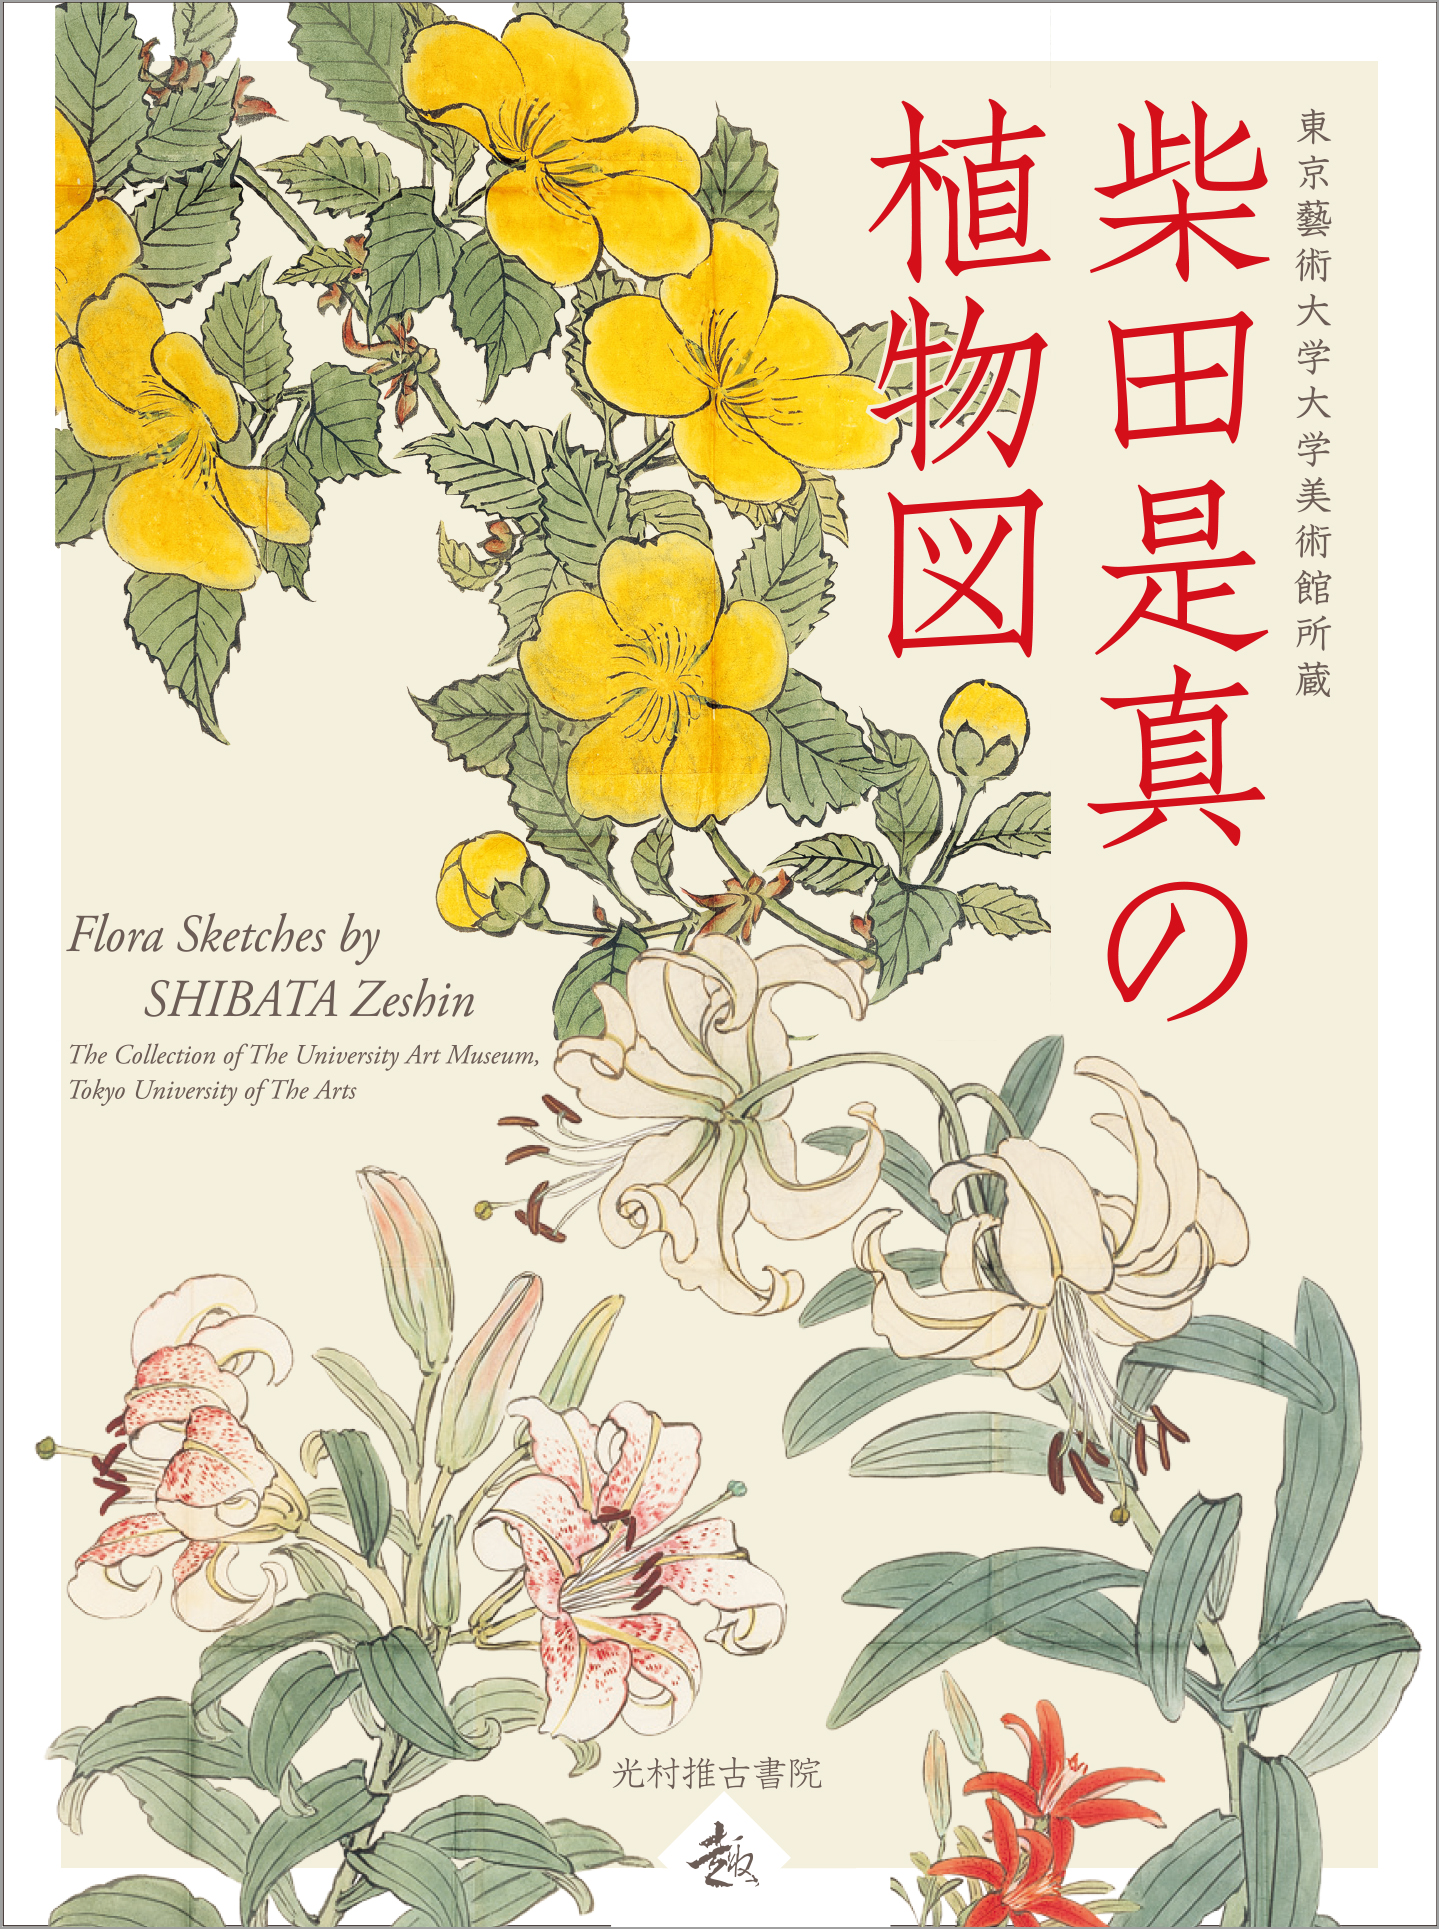 Flora Sketches by SHIBATA ZeshinThe Collection of The University Art Museum, Tokyo University of The Arts